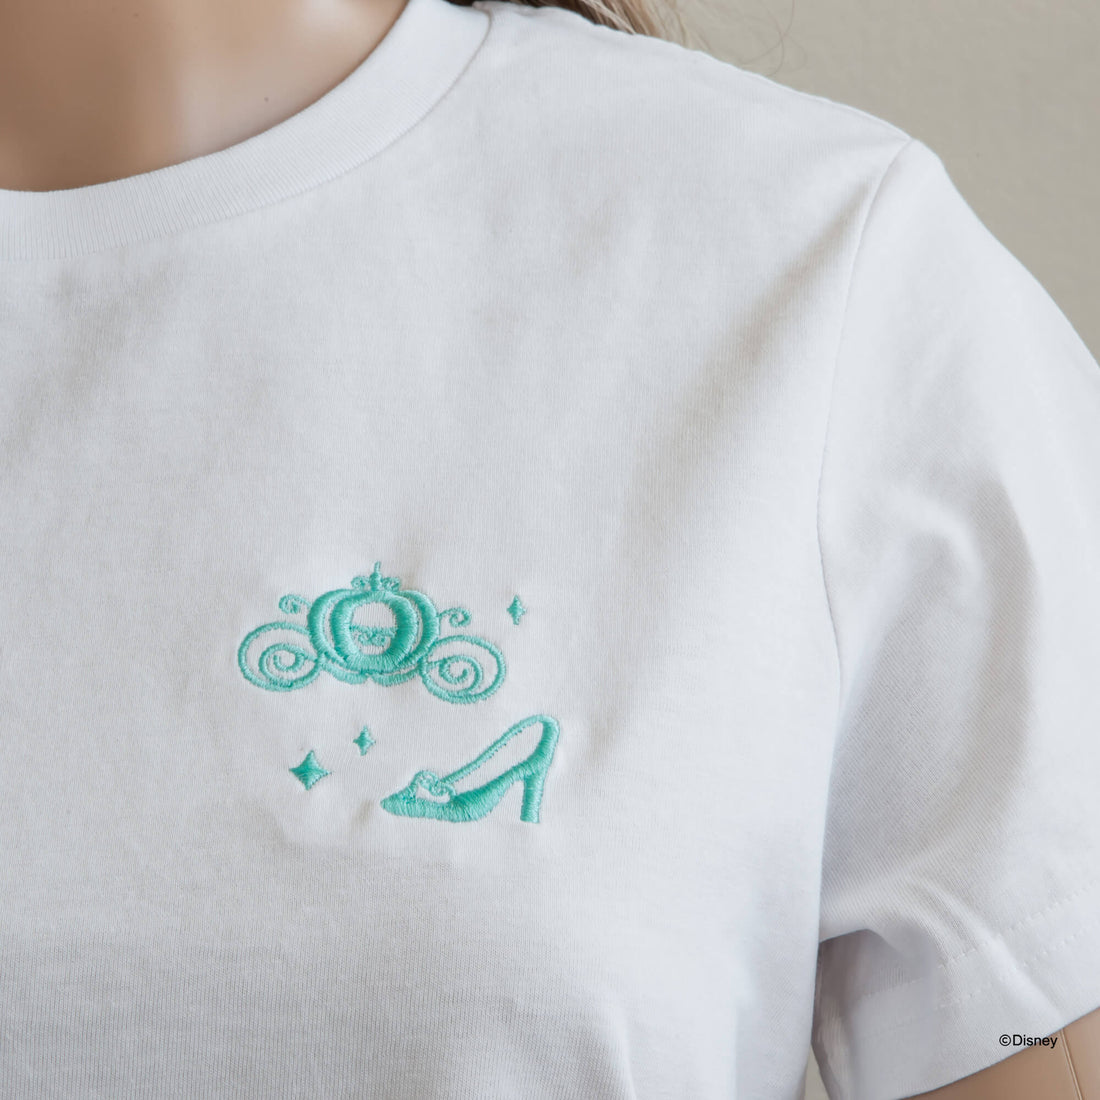 T-Shirt Embroidery Cinderella Glass Slipper and Carriage